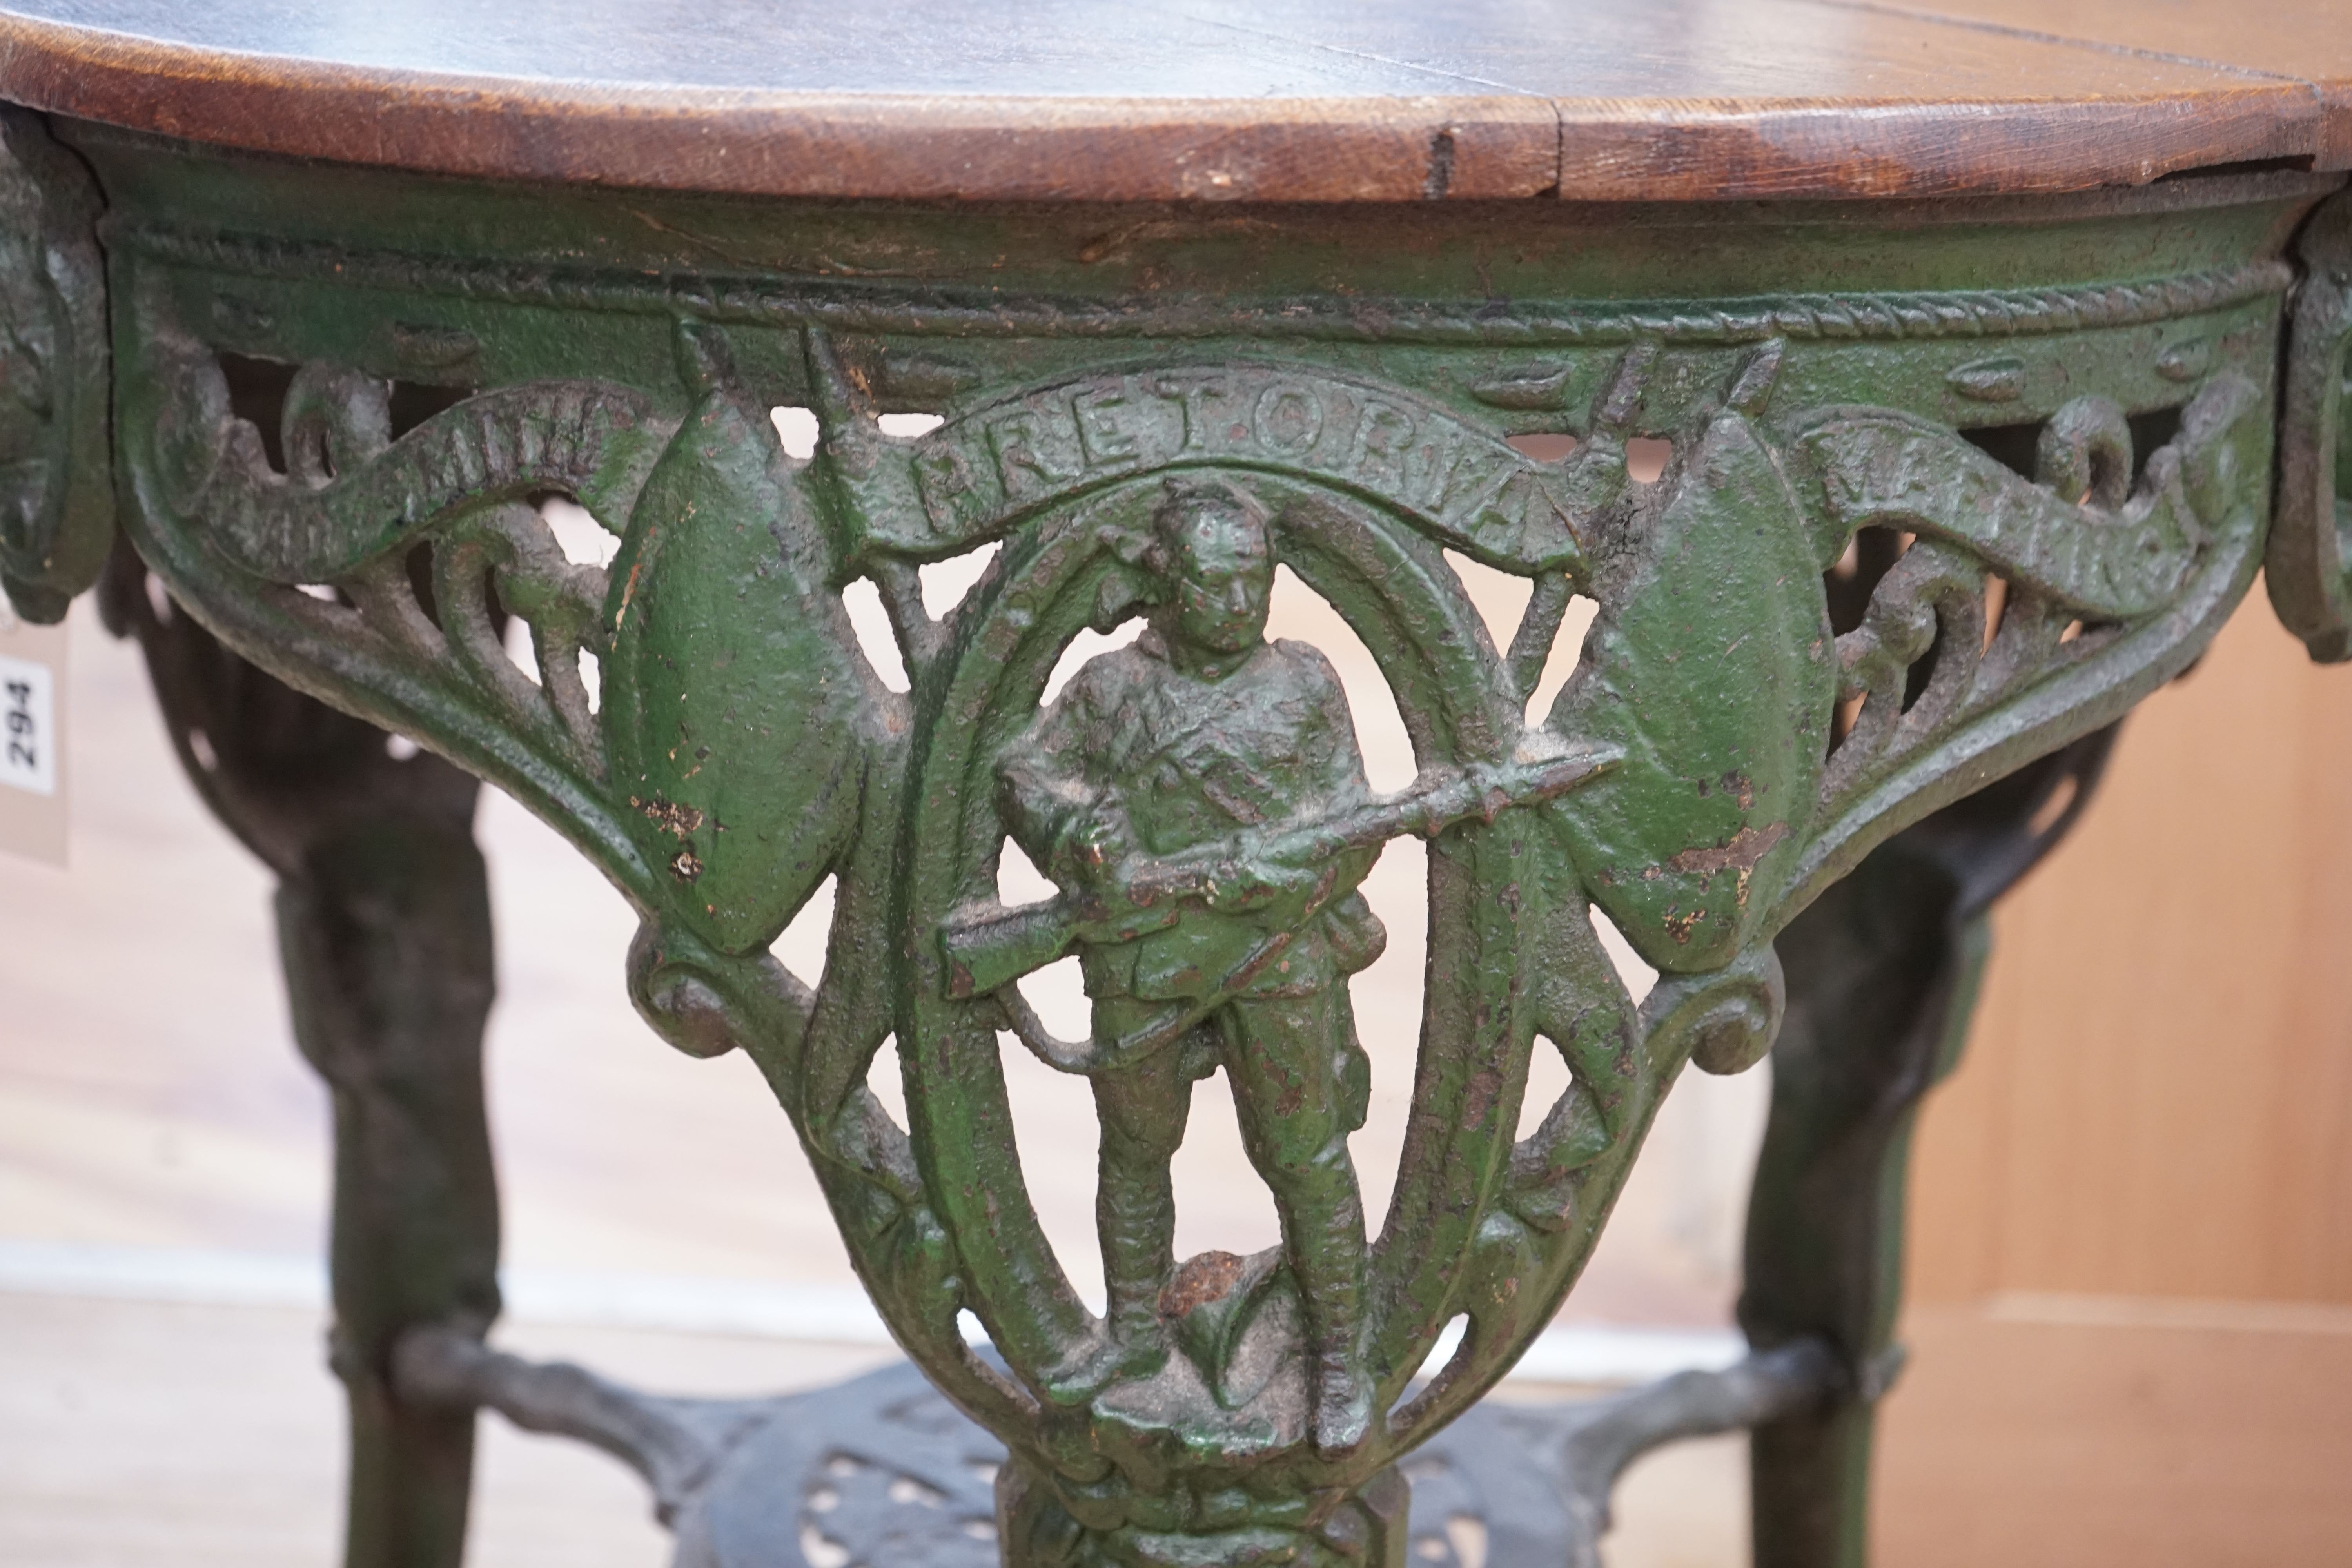 A rare early 20th century Boer War commemorative cast iron pub table, decorated with standing soldiers beneath Ladysmith, Pretoria and Mafeking scrolls, legs bearing registered number 364112, the circular oak top 62cm di